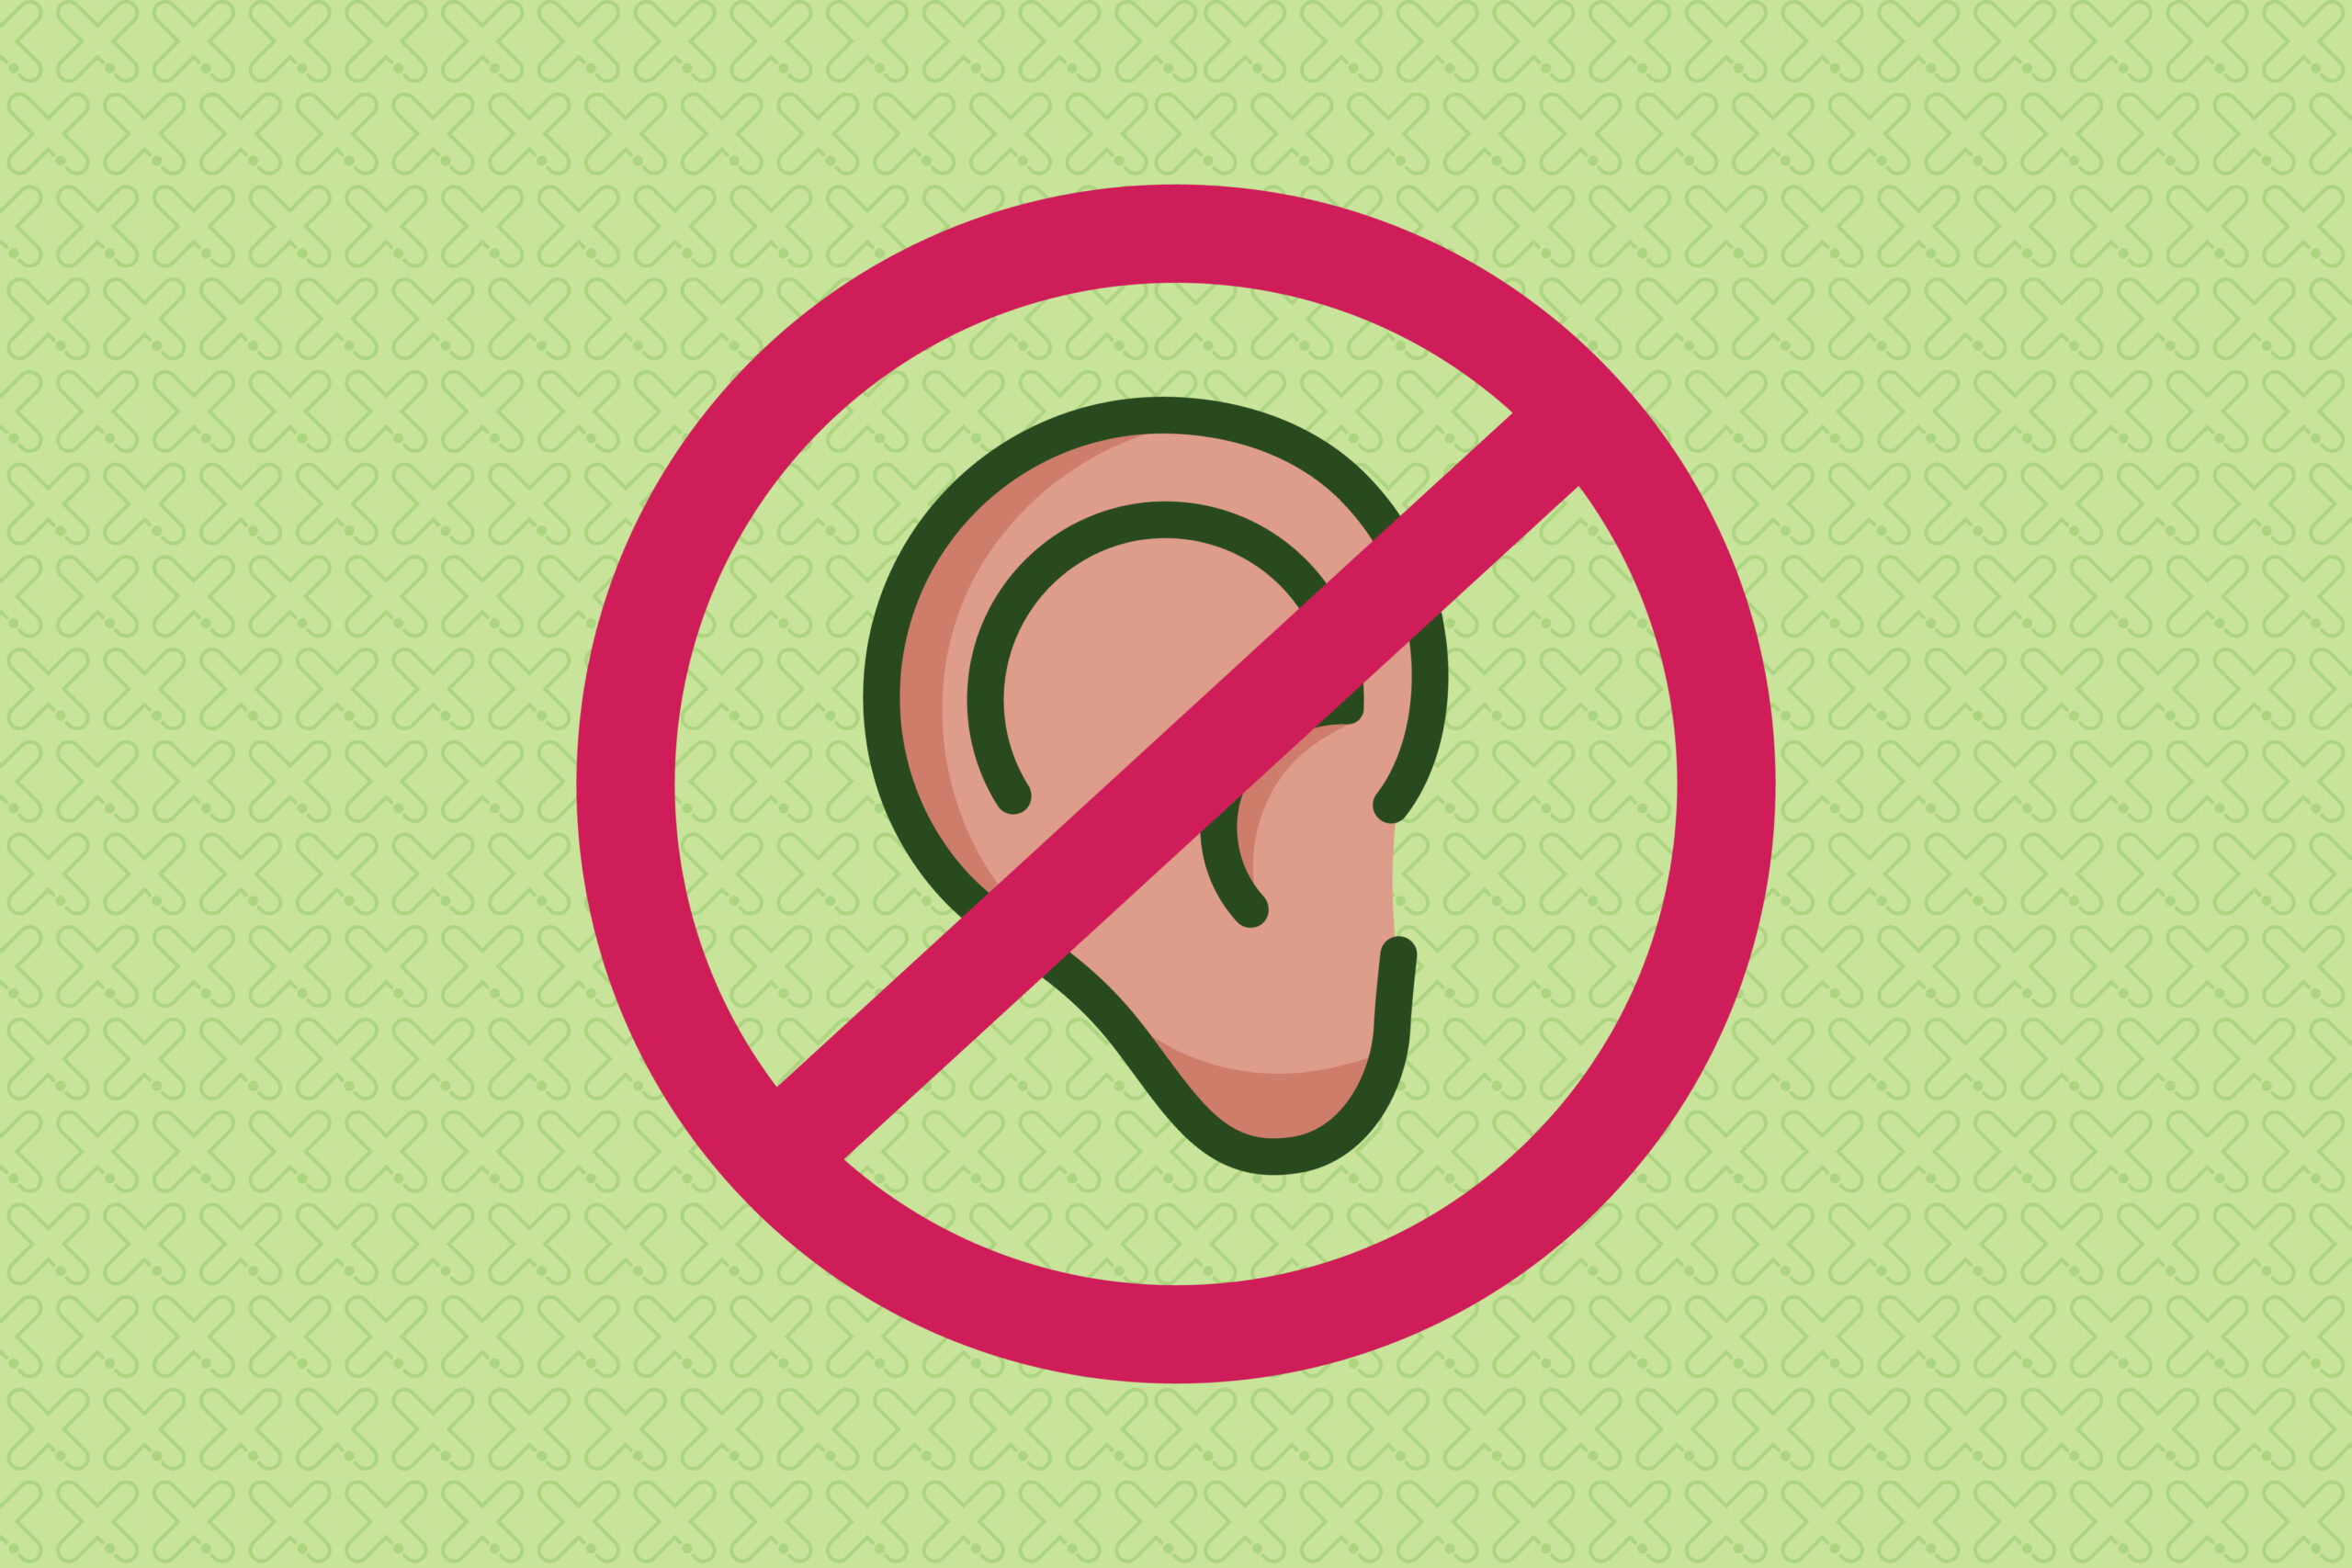 An illustration of an ear with a 'banned' icon over the top.